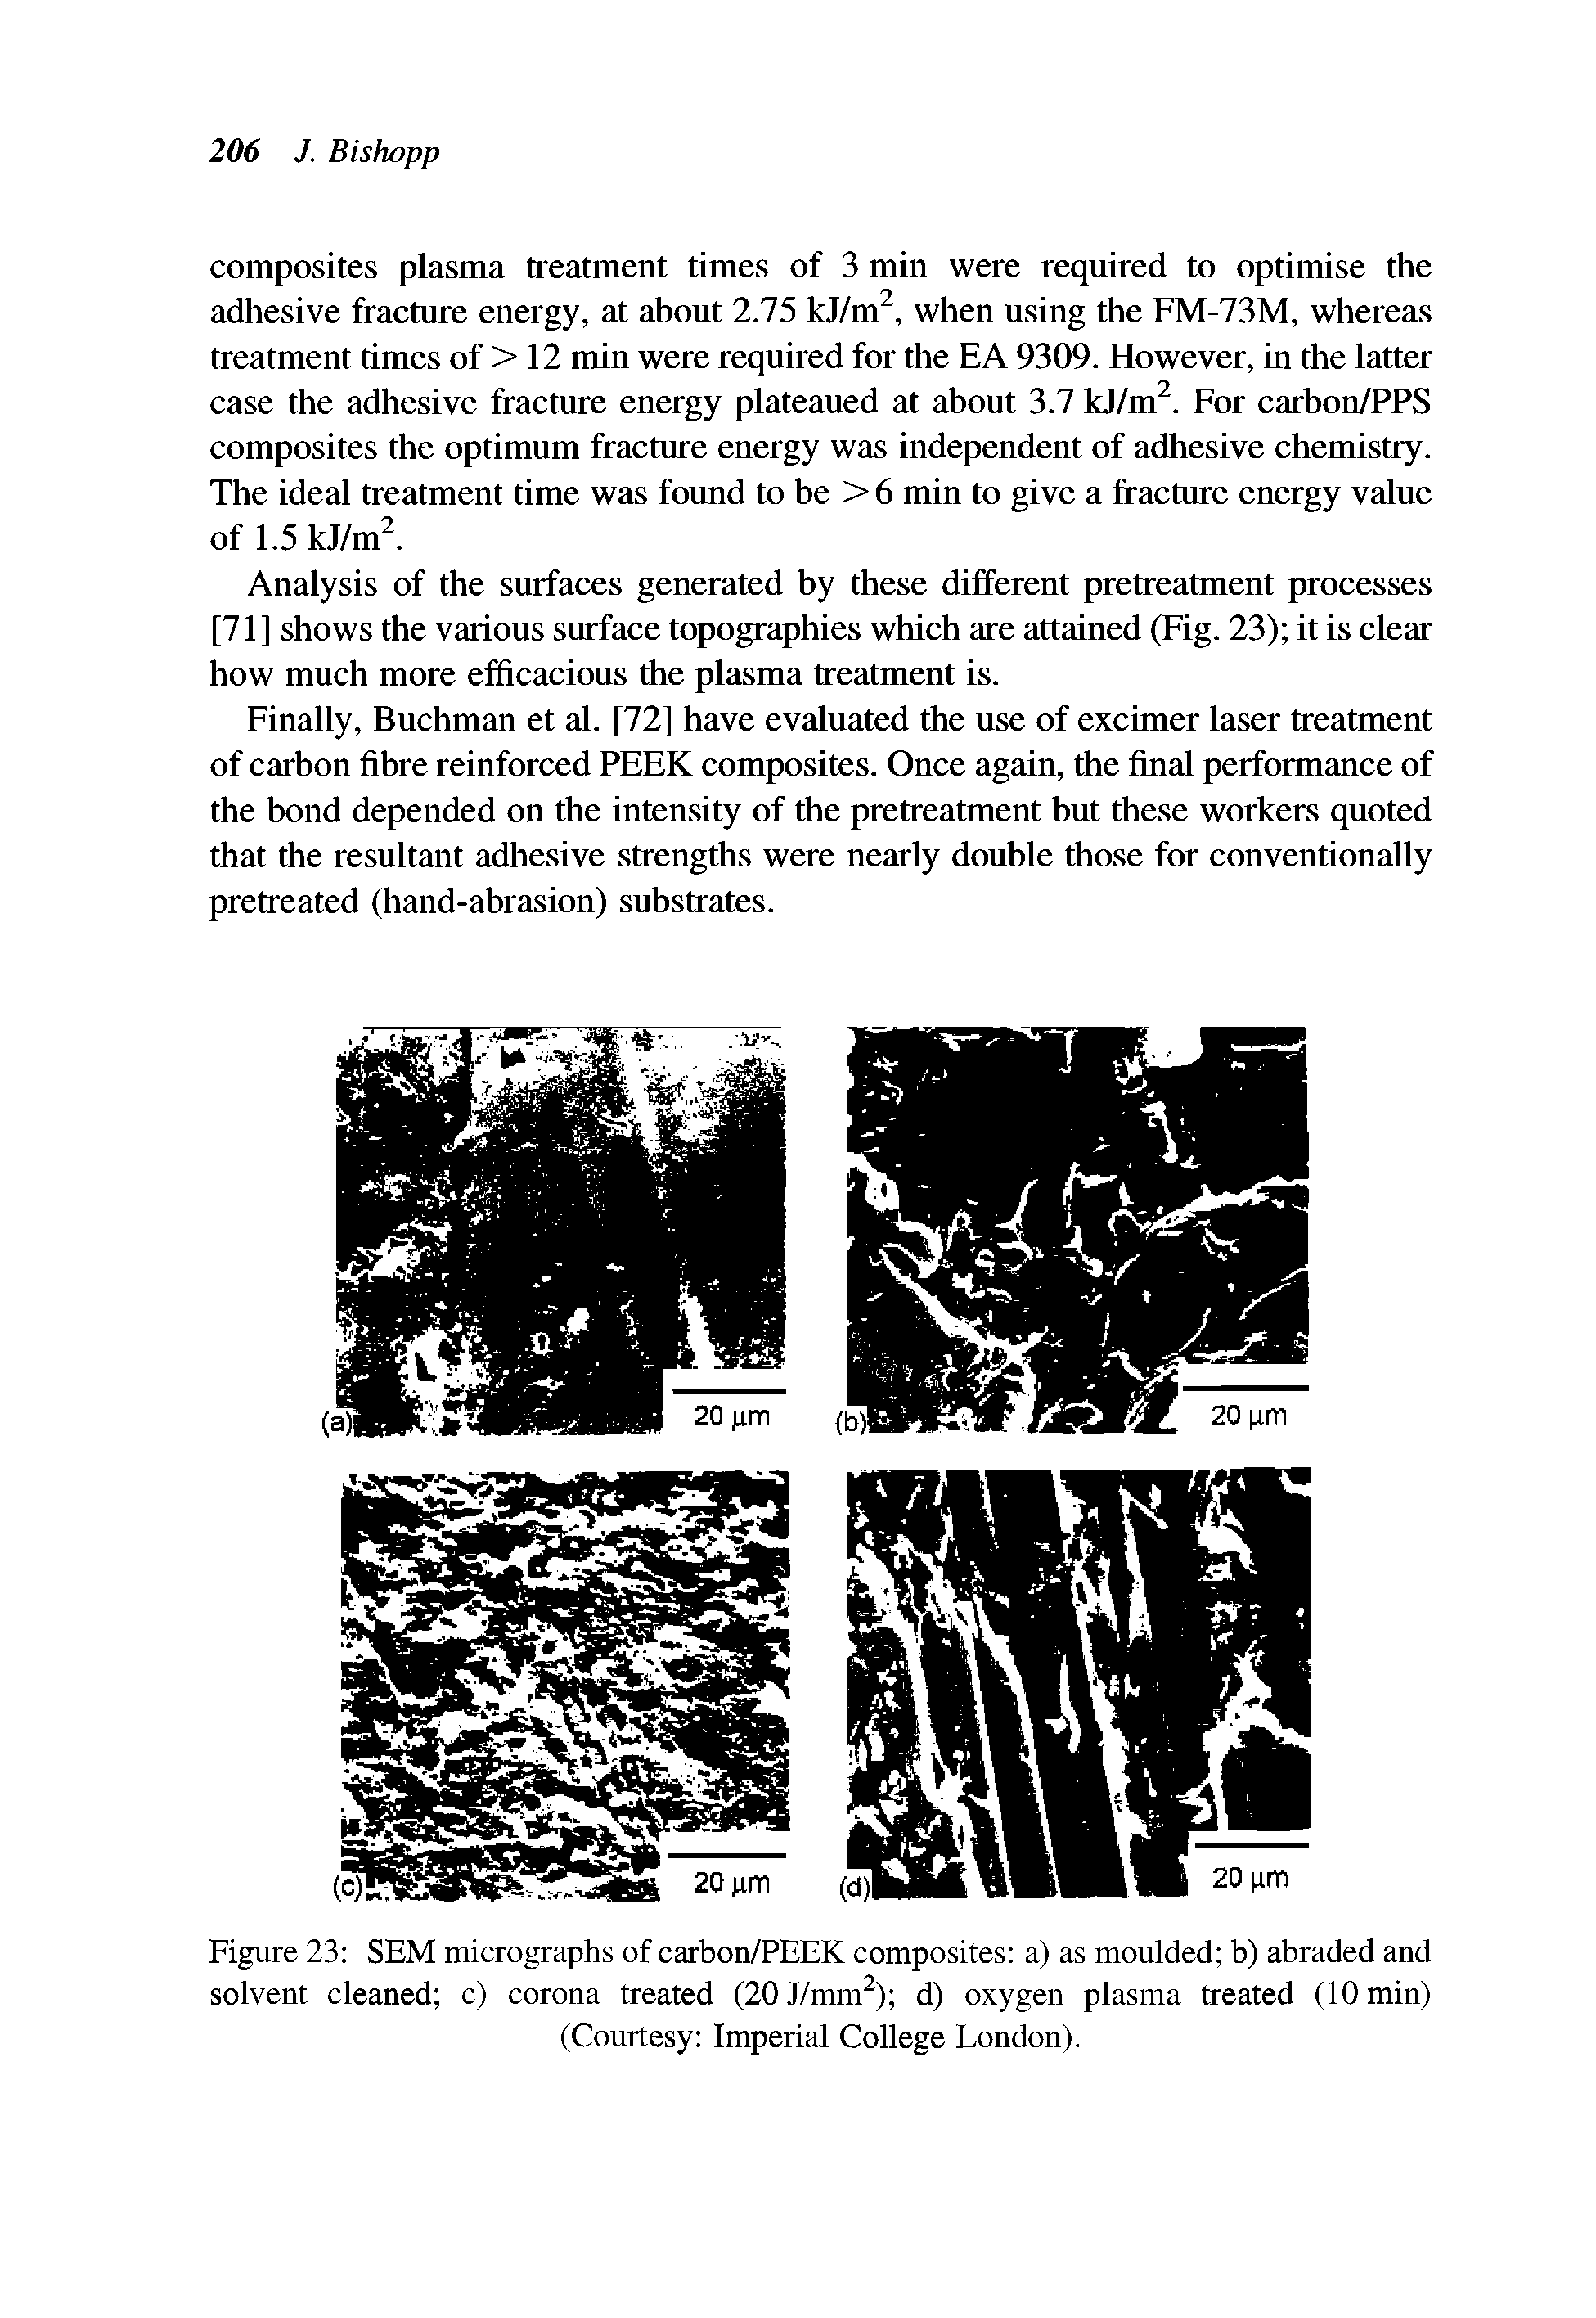 Figure 23 SEM micrographs of carbon/PEEK composites a) as moulded b) abraded and solvent cleaned c) corona treated (20J/mm ) d) oxygen plasma treated (10 min) (Courtesy Imperial College London).